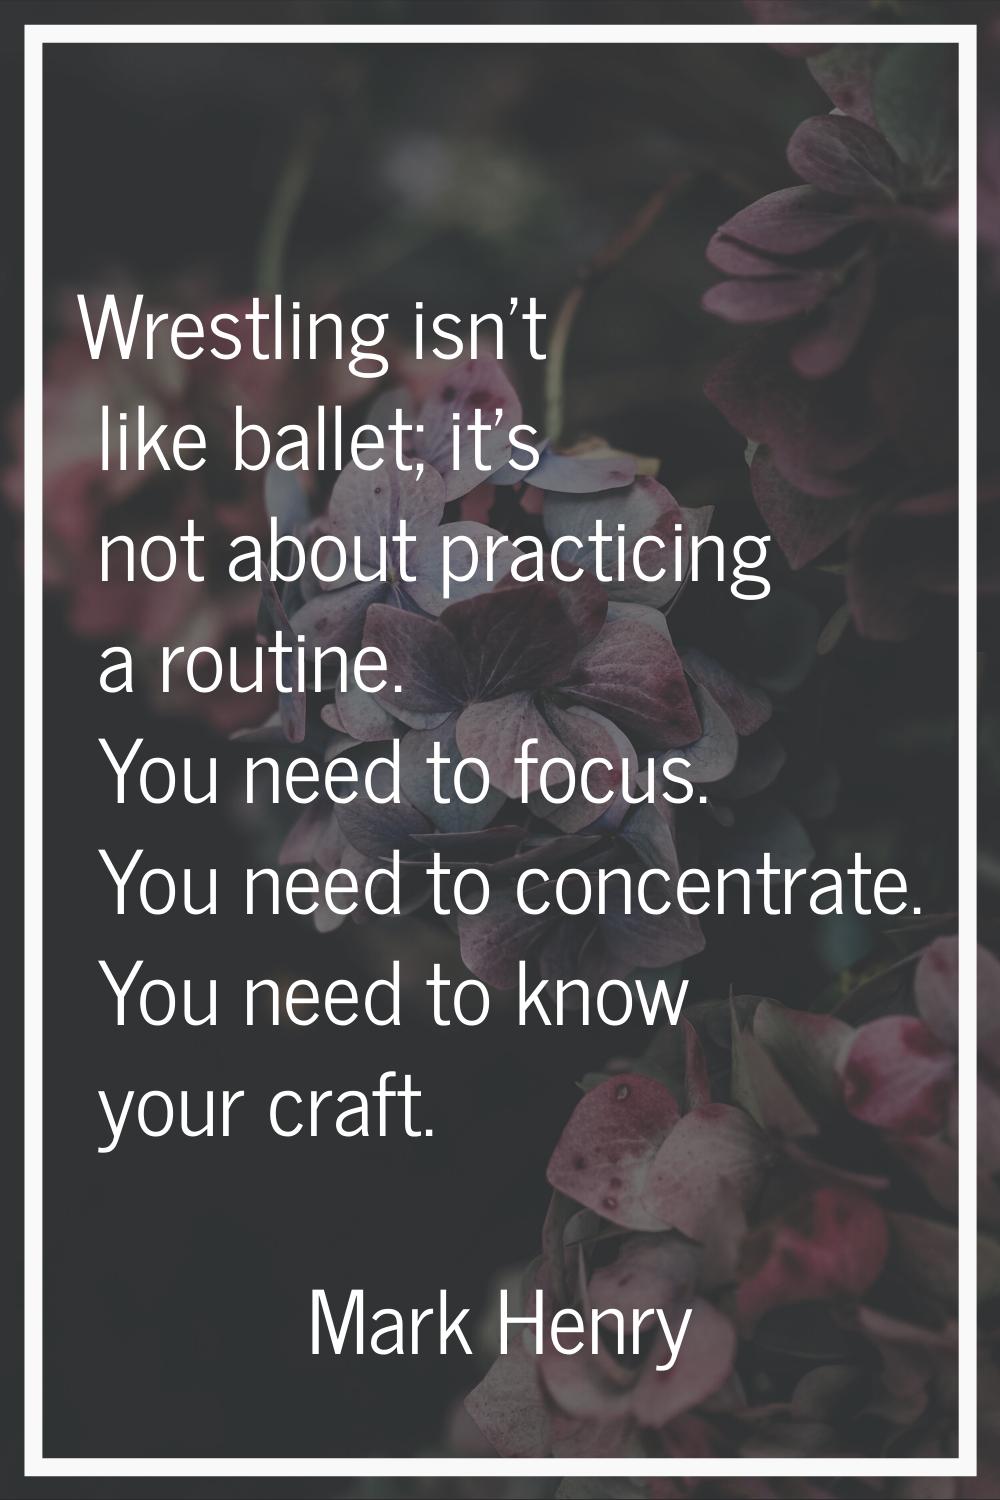 Wrestling isn't like ballet; it's not about practicing a routine. You need to focus. You need to co